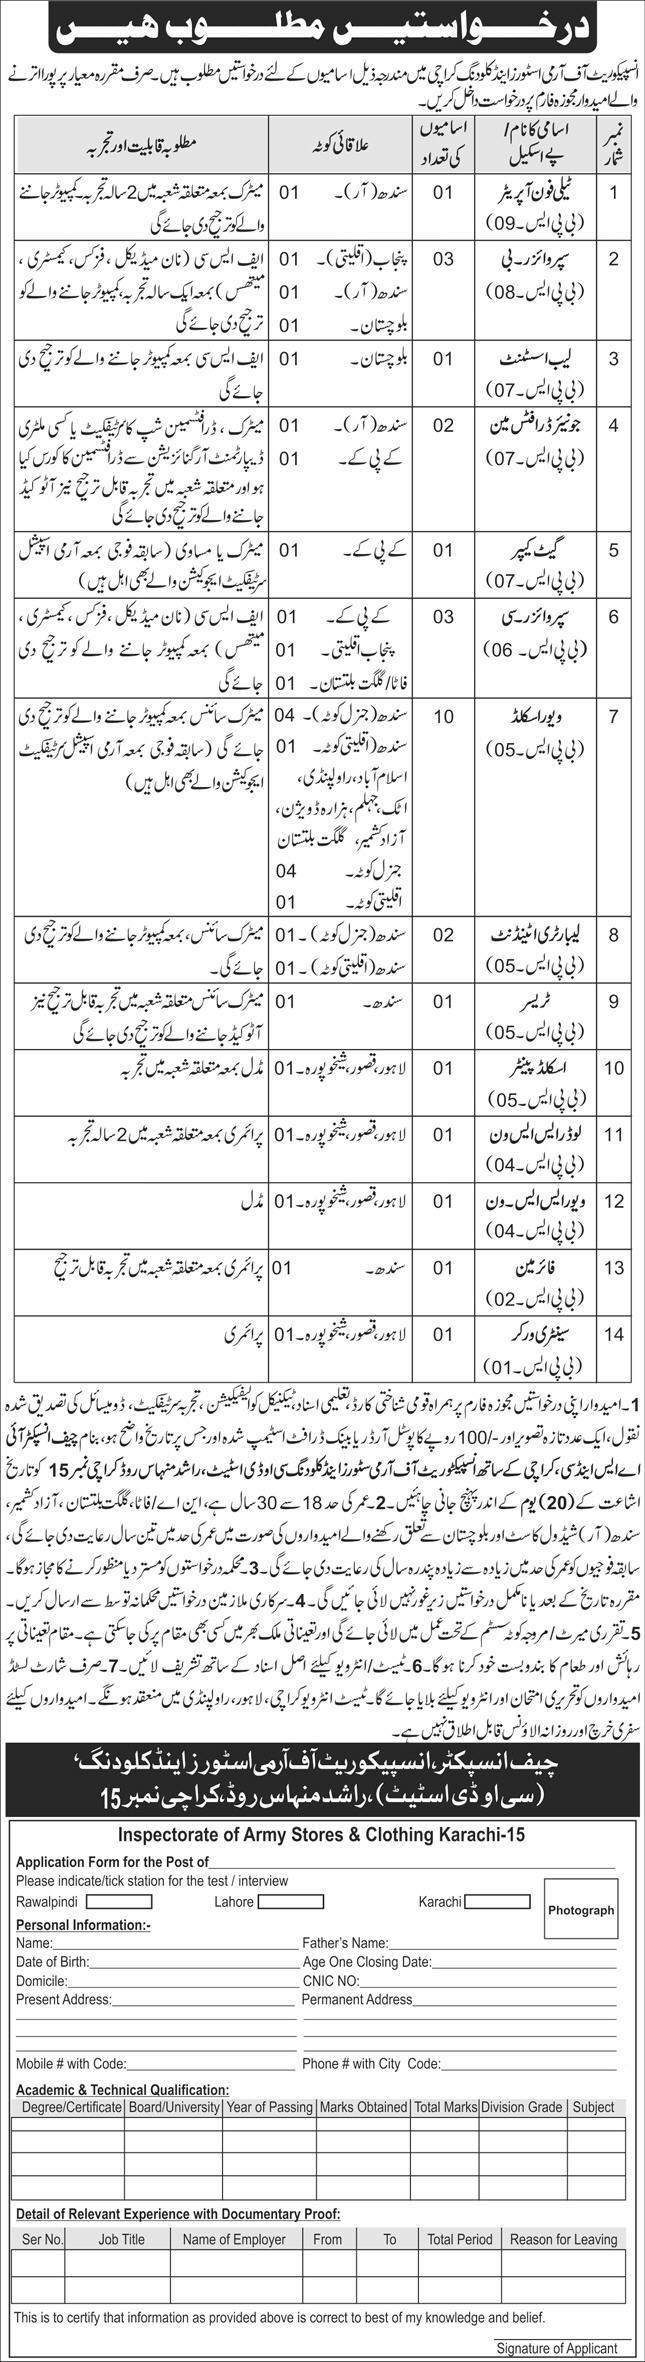 Pak Army Inspectorate of Army Stores & Clothing Karachi Jobs 2022